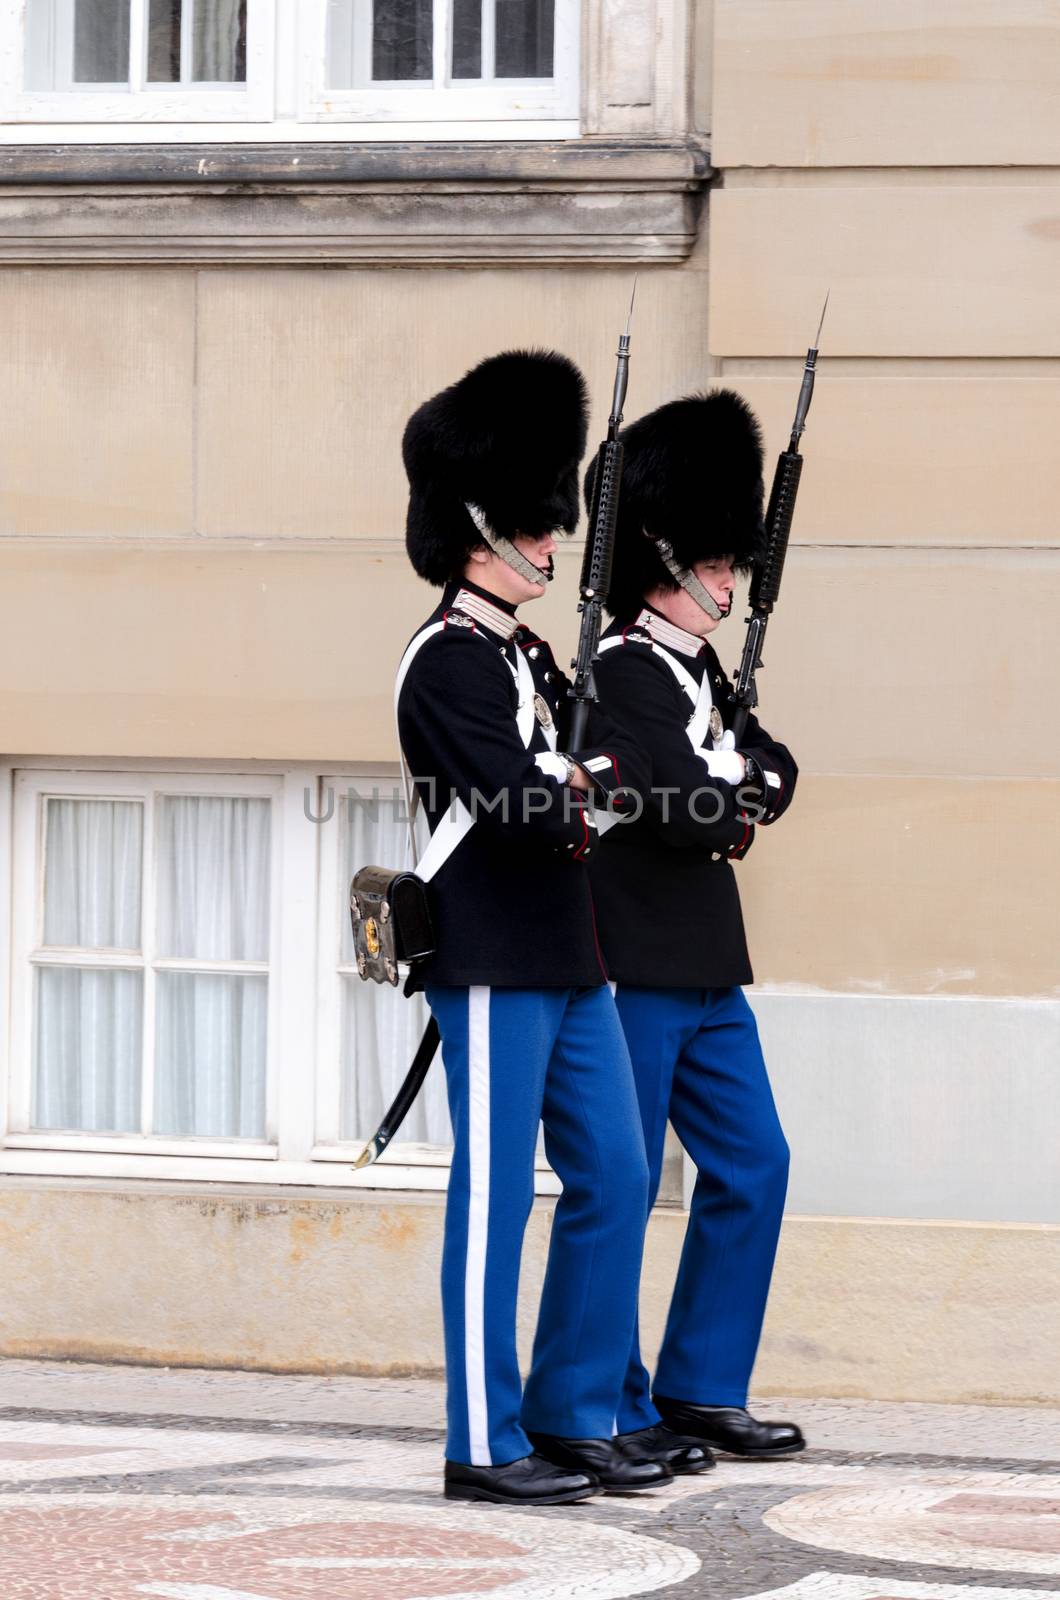 COPENHAGEN, DENMARK - AUGUST 23 : Royal guard at Amalienborg Slot at August 23, 2012 in Copenhagen, Denmark. This palace is the home of the Danish royal family and a top tourist attraction as well.